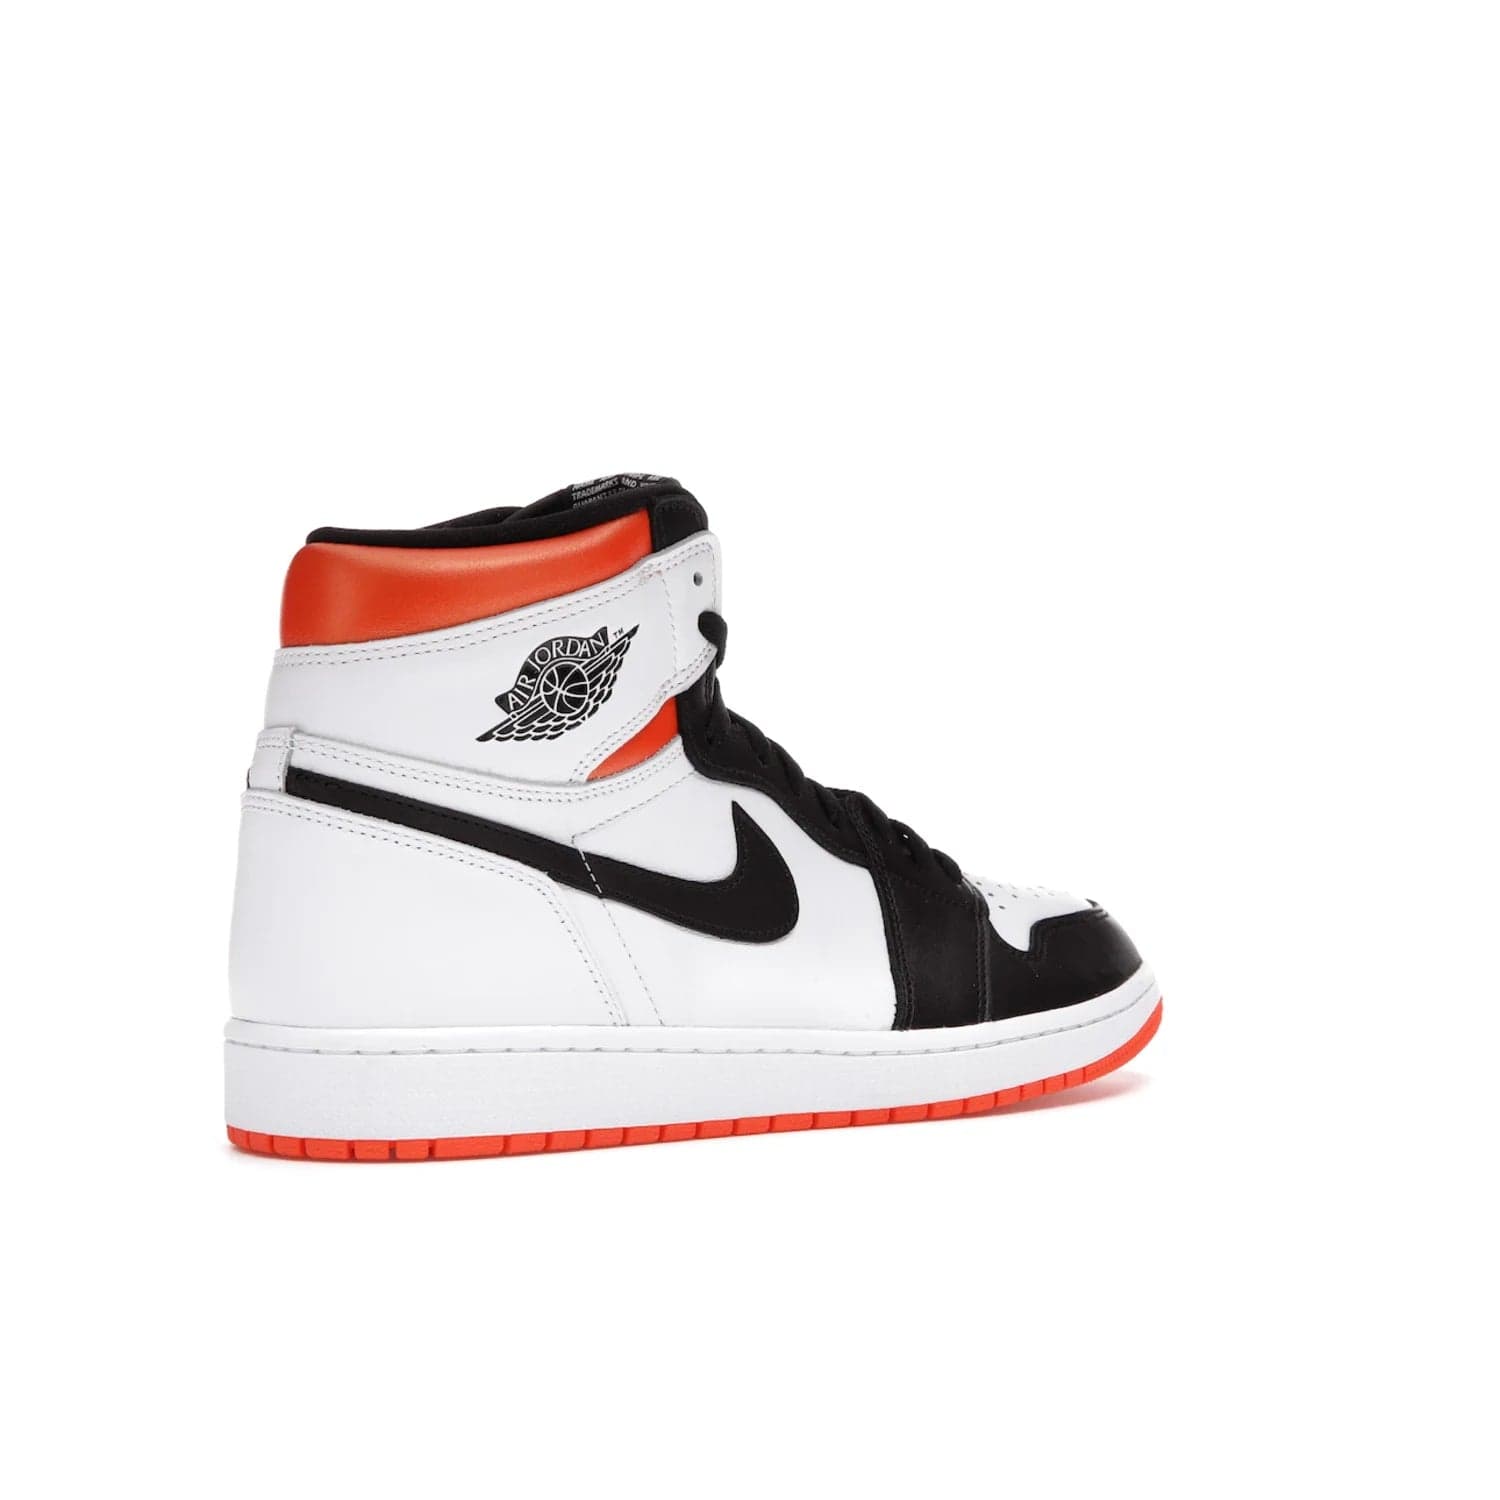 Jordan 1 Retro High Electro Orange - Image 33 - Only at www.BallersClubKickz.com - This Air Jordan 1 Retro High Electro Orange features a white leather upper with black overlays and vibrant Hyper Orange ankle wrap. Turn heads with this iconic design of woven tongue label and sole. Get yours today and add some serious style to your rotation.